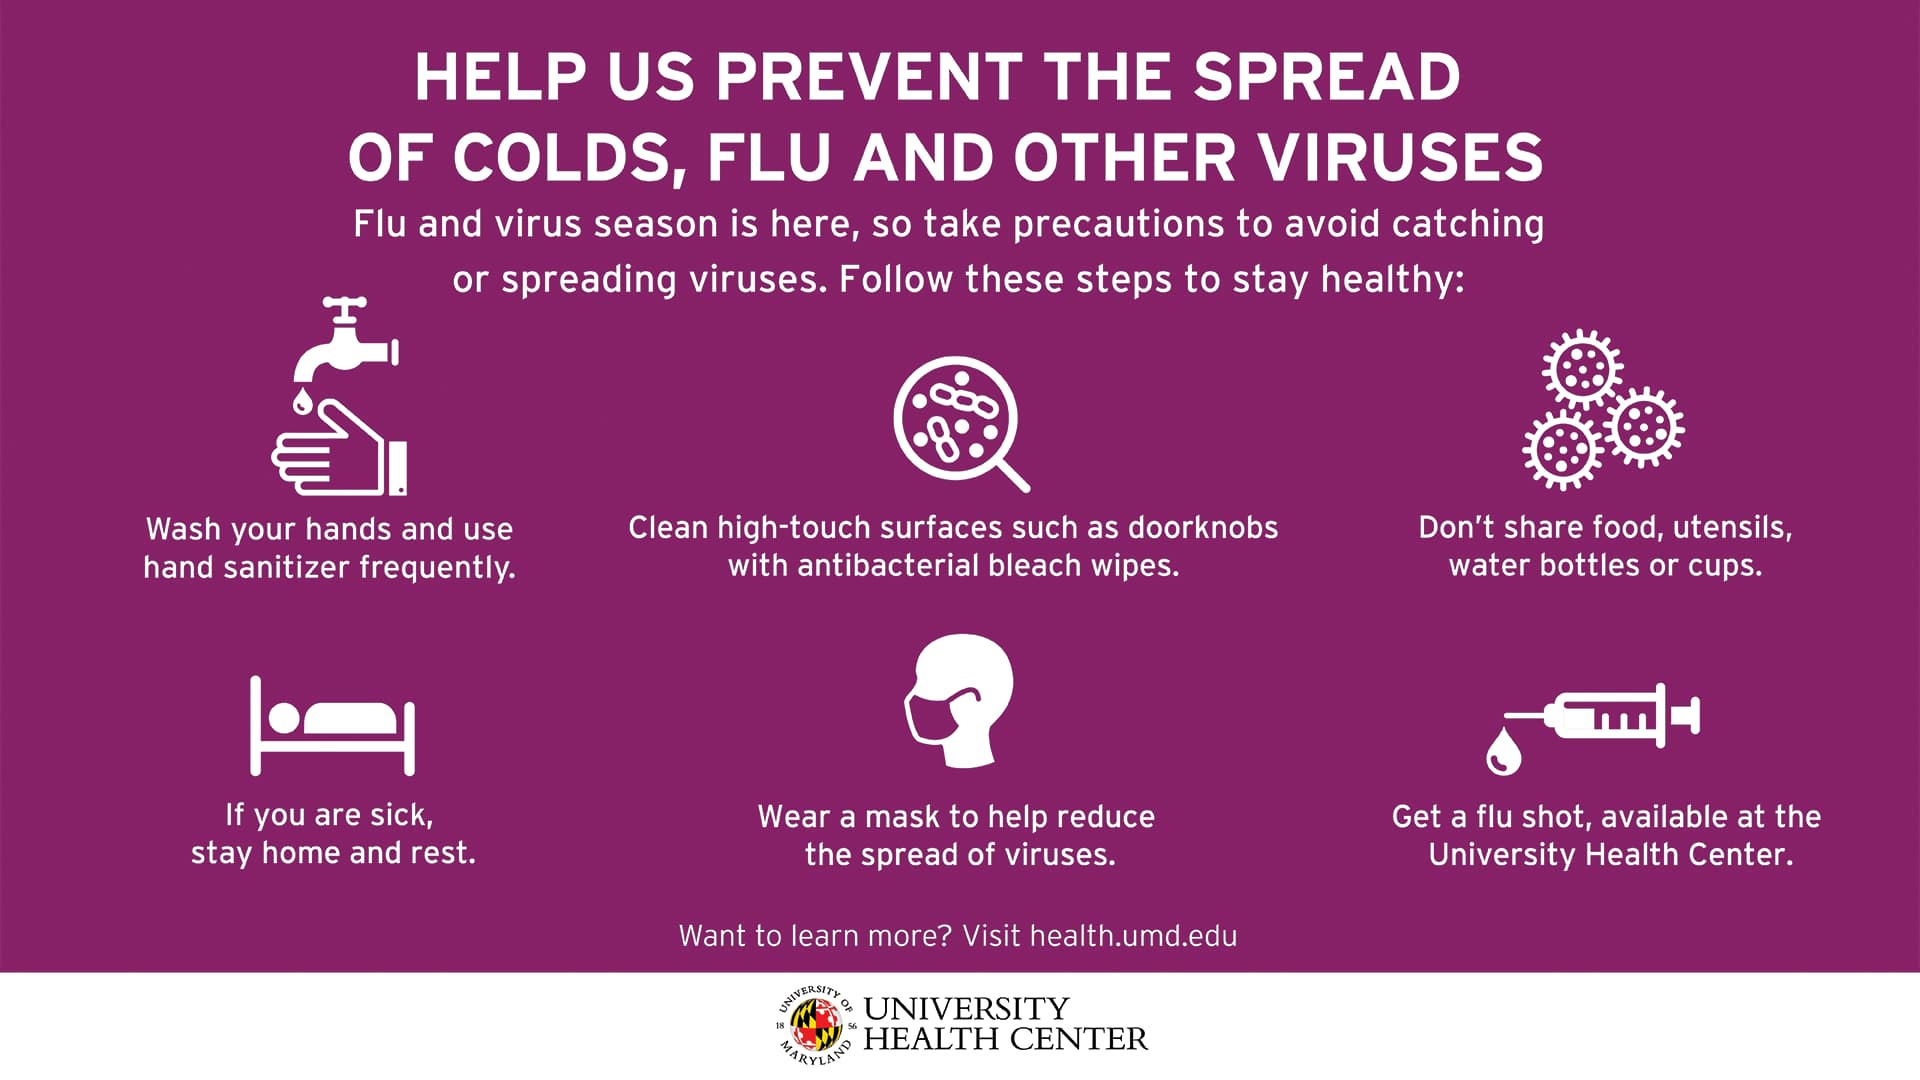 Help us prevent the spread of colds, flu and other viruses. Flu and virus season is here, so take precautions to avoid catching or spreading viruses. Follow these steps to stay healthy: Wash your hands and use hand sanitizer frequently. Clean high-touch surfaces such as doorknobs with antibacterial bleach wipes. Don't share food, utensils, water bottles or cups. If you are sick, stay home and rest. Wear a mask to help reduce the spread of viruses. Get a flu shot, available at the University Health Center. Want to learn more? Visit health.umd.edu